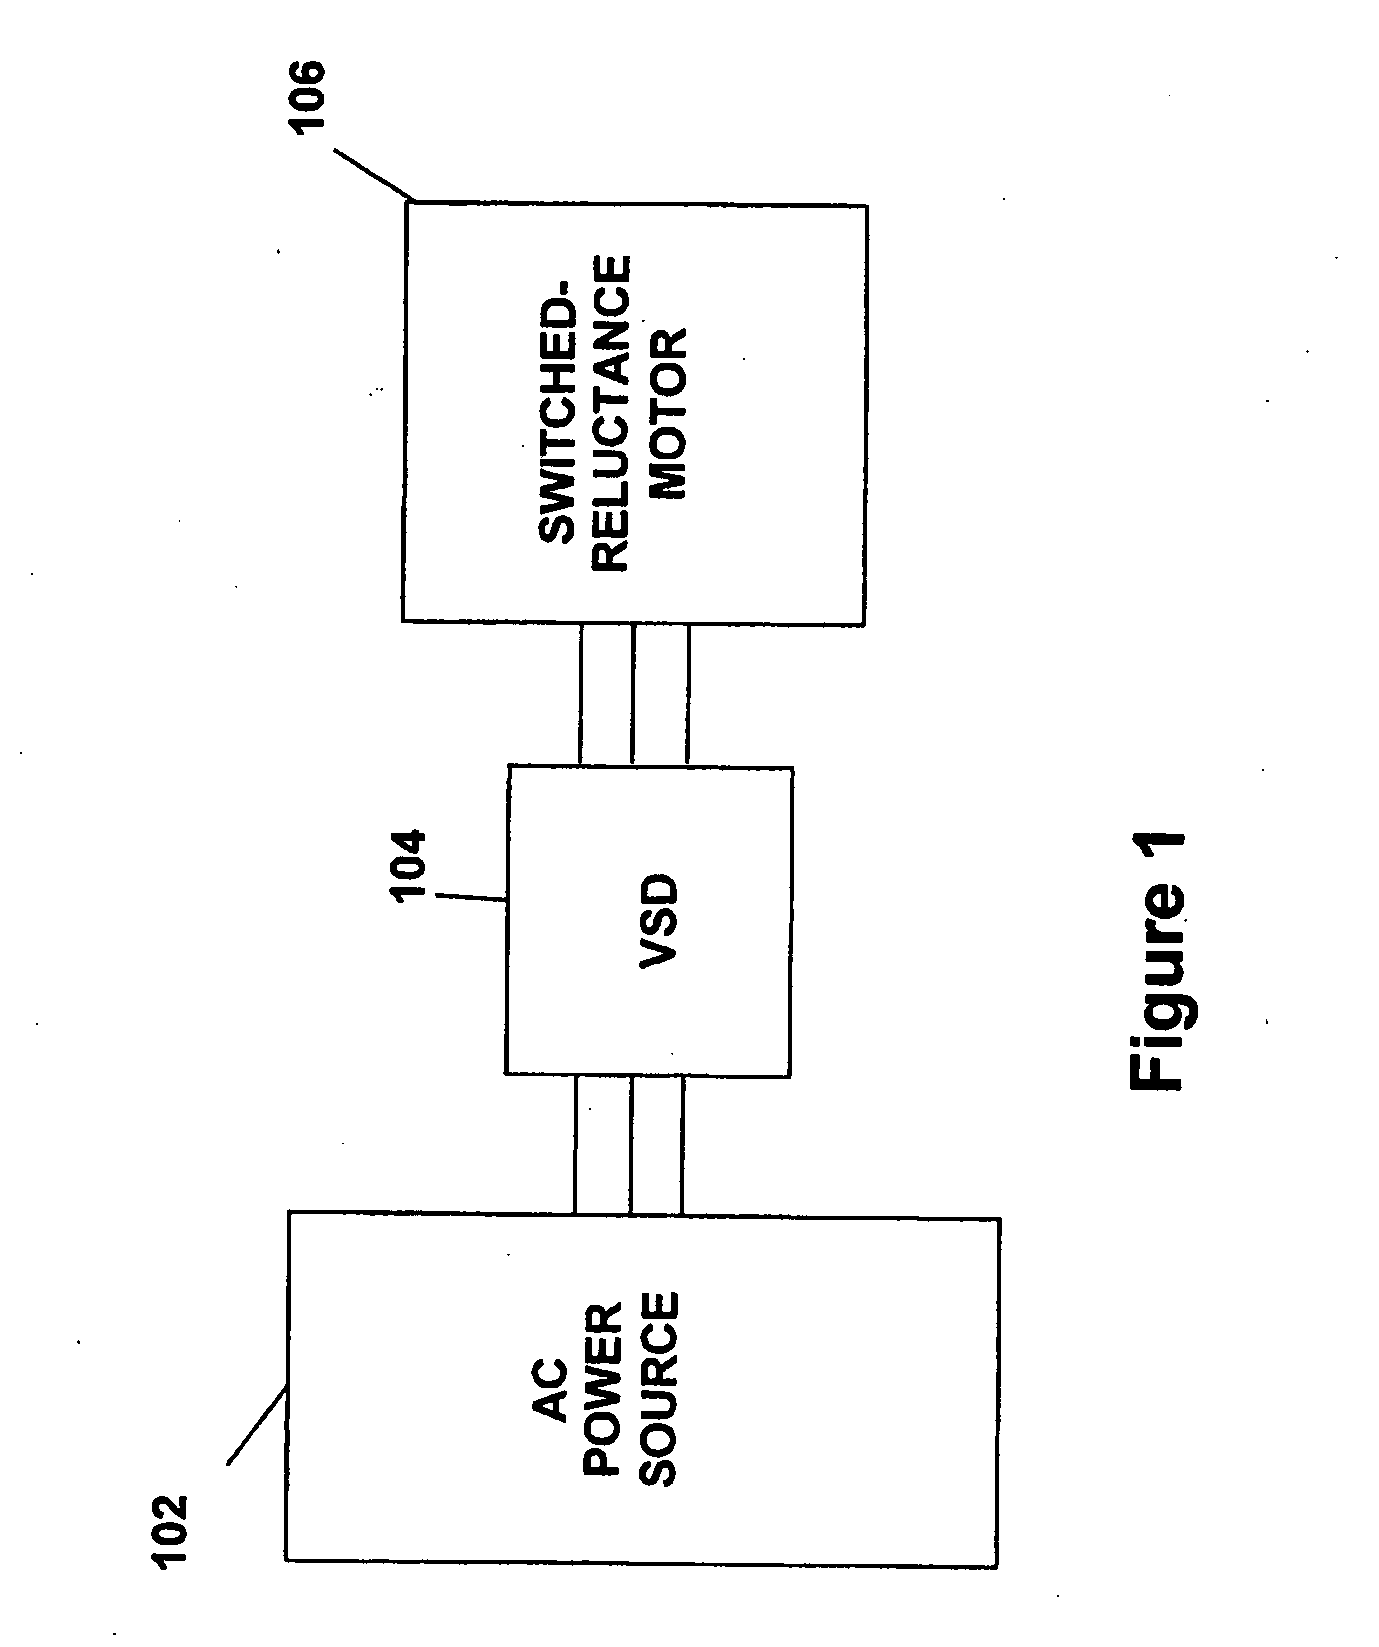 Application of a switched reluctance motion control system in a chiller system